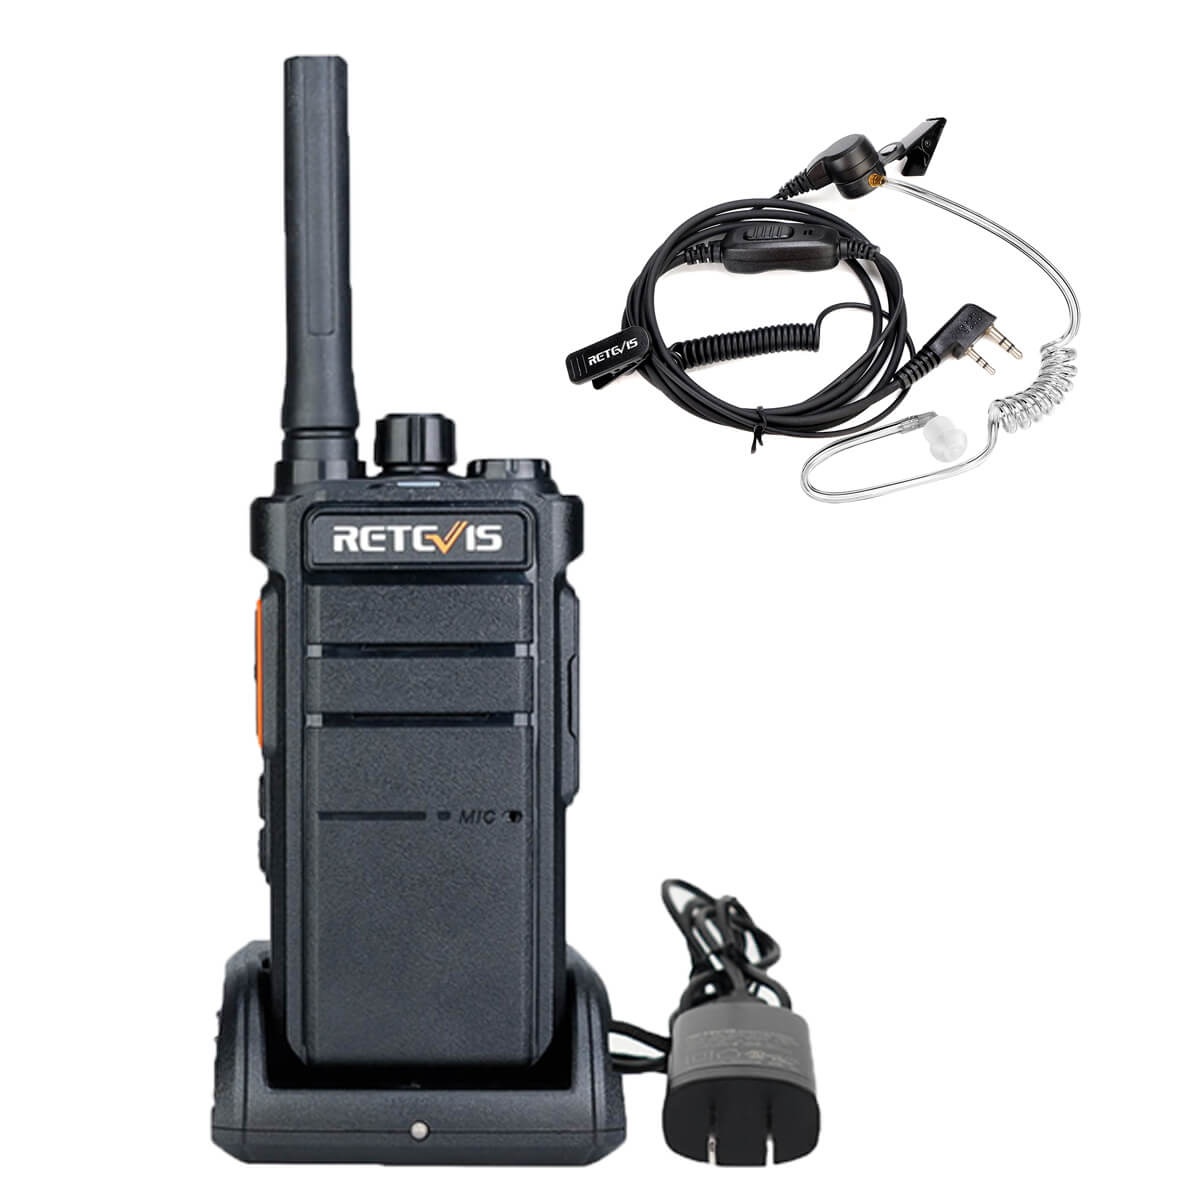 RB26 Powerful Torch Light GMRS Walkie Talkie